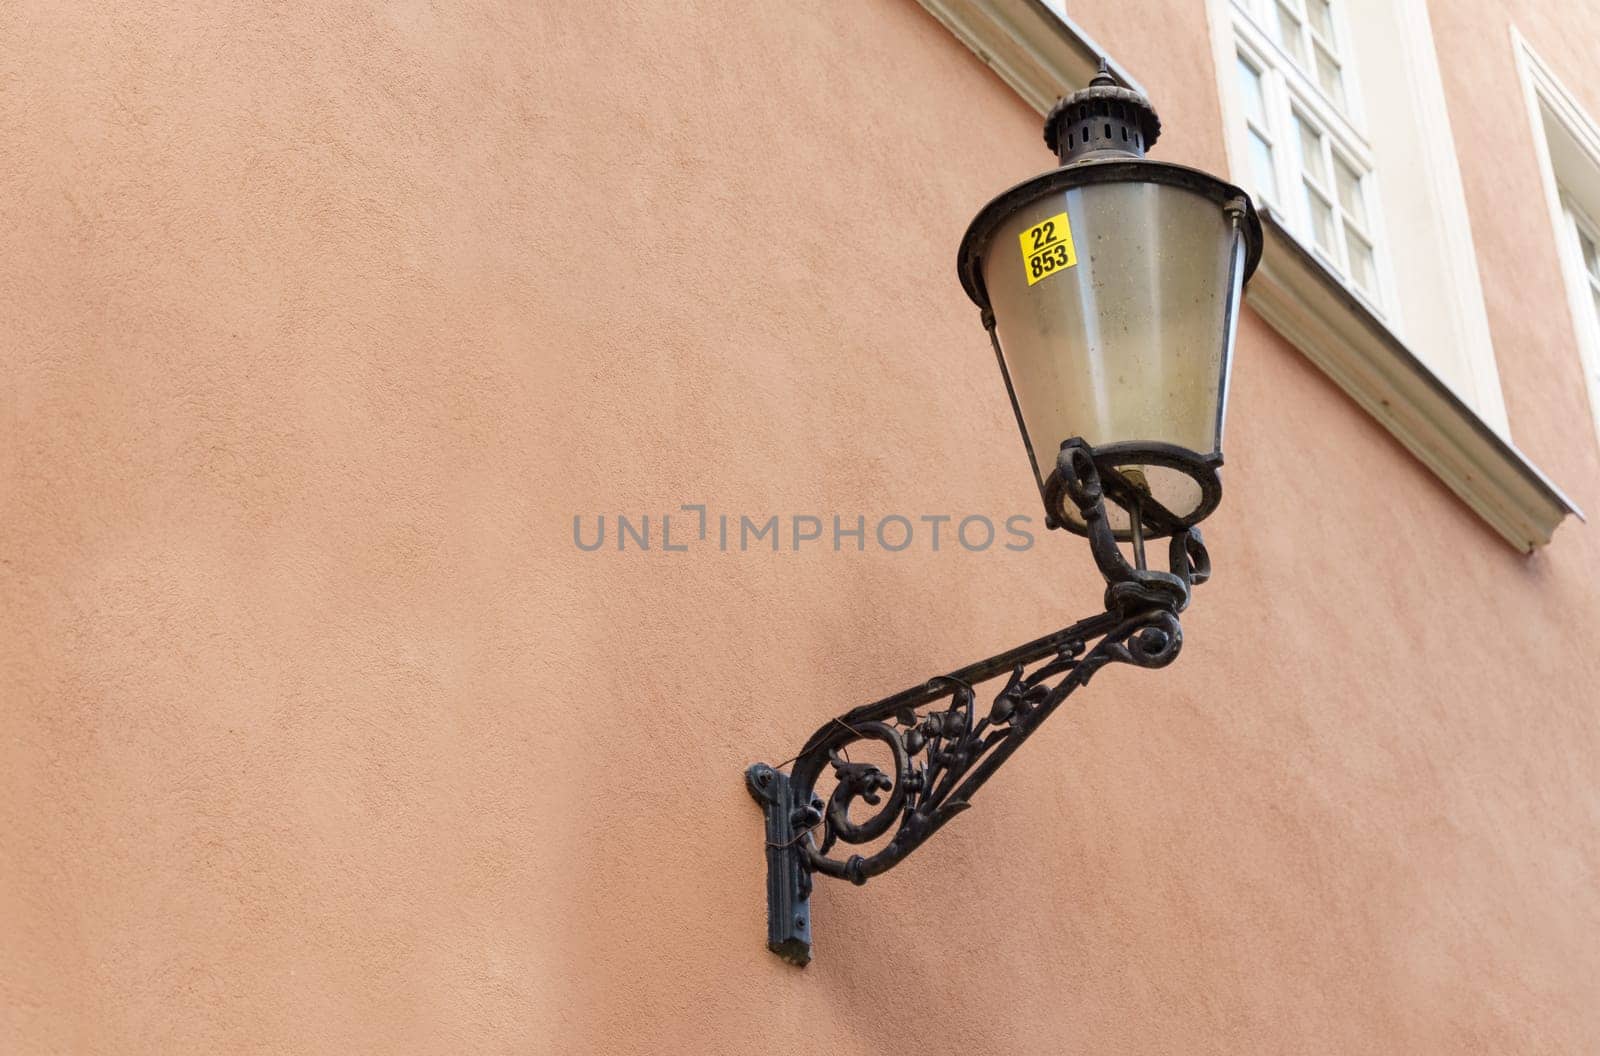 A street light is attached to the side of a building, illuminating the area around it.